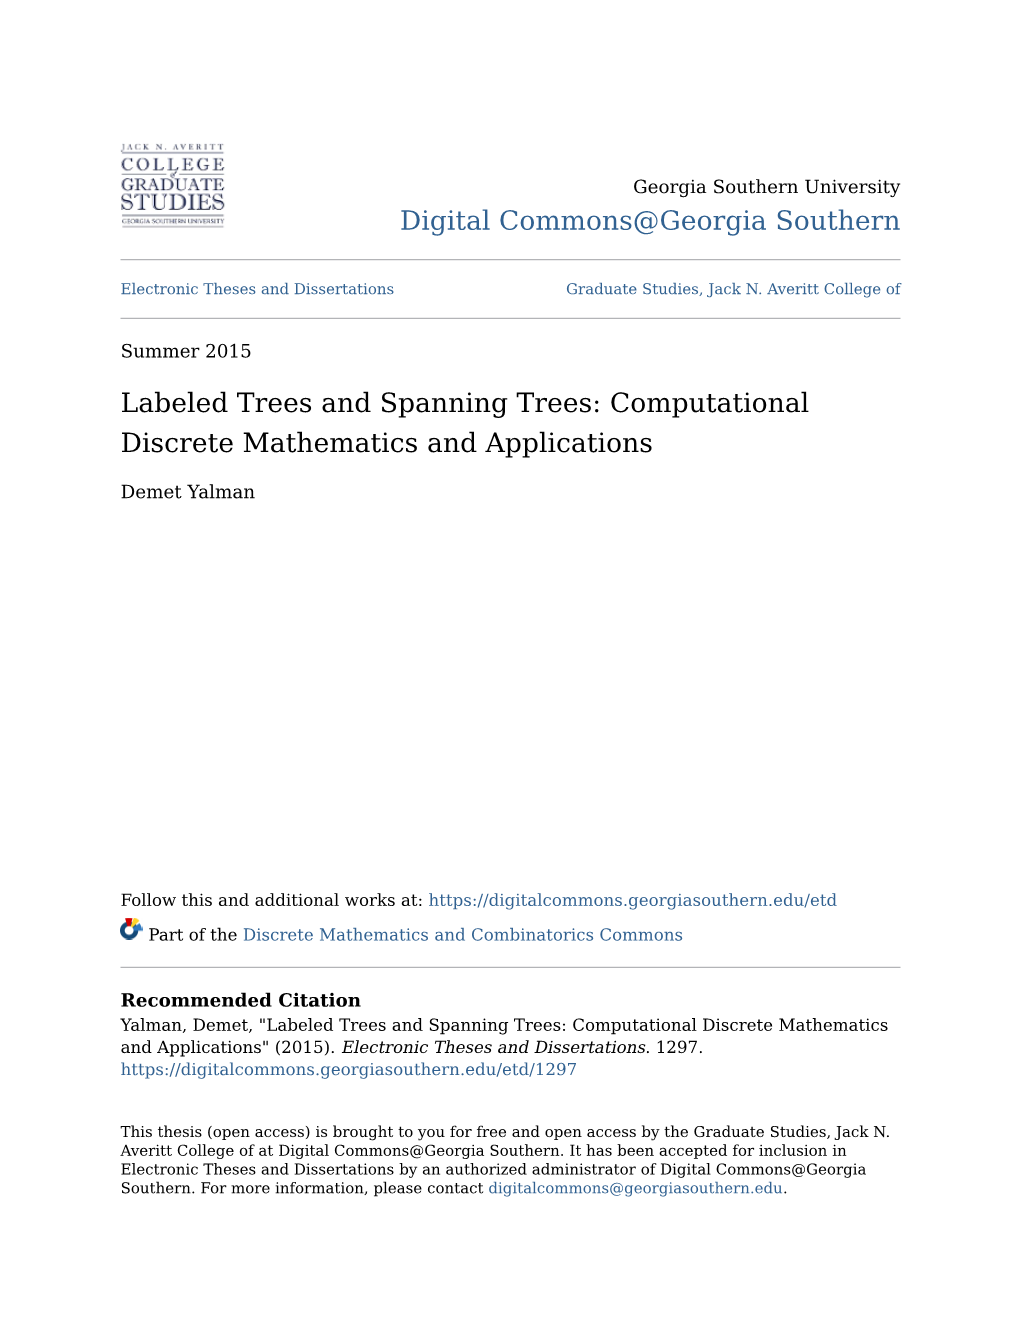 Labeled Trees and Spanning Trees: Computational Discrete Mathematics and Applications